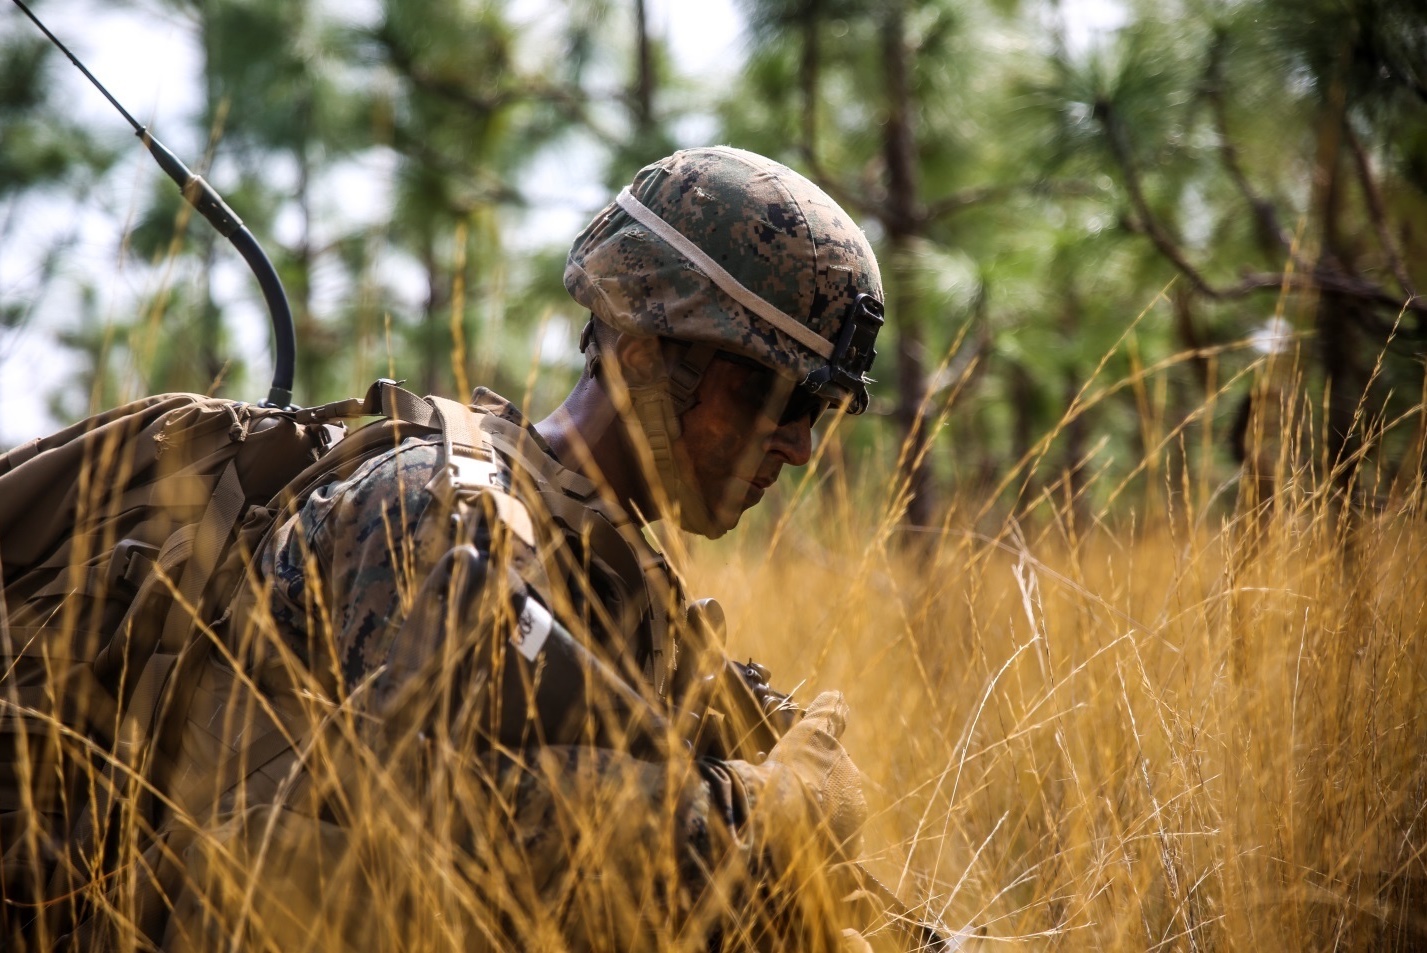 A Marine takes cover in the high grass during an amphibious field exercise aboard Marine Corps Base Camp Lejeune, N.C